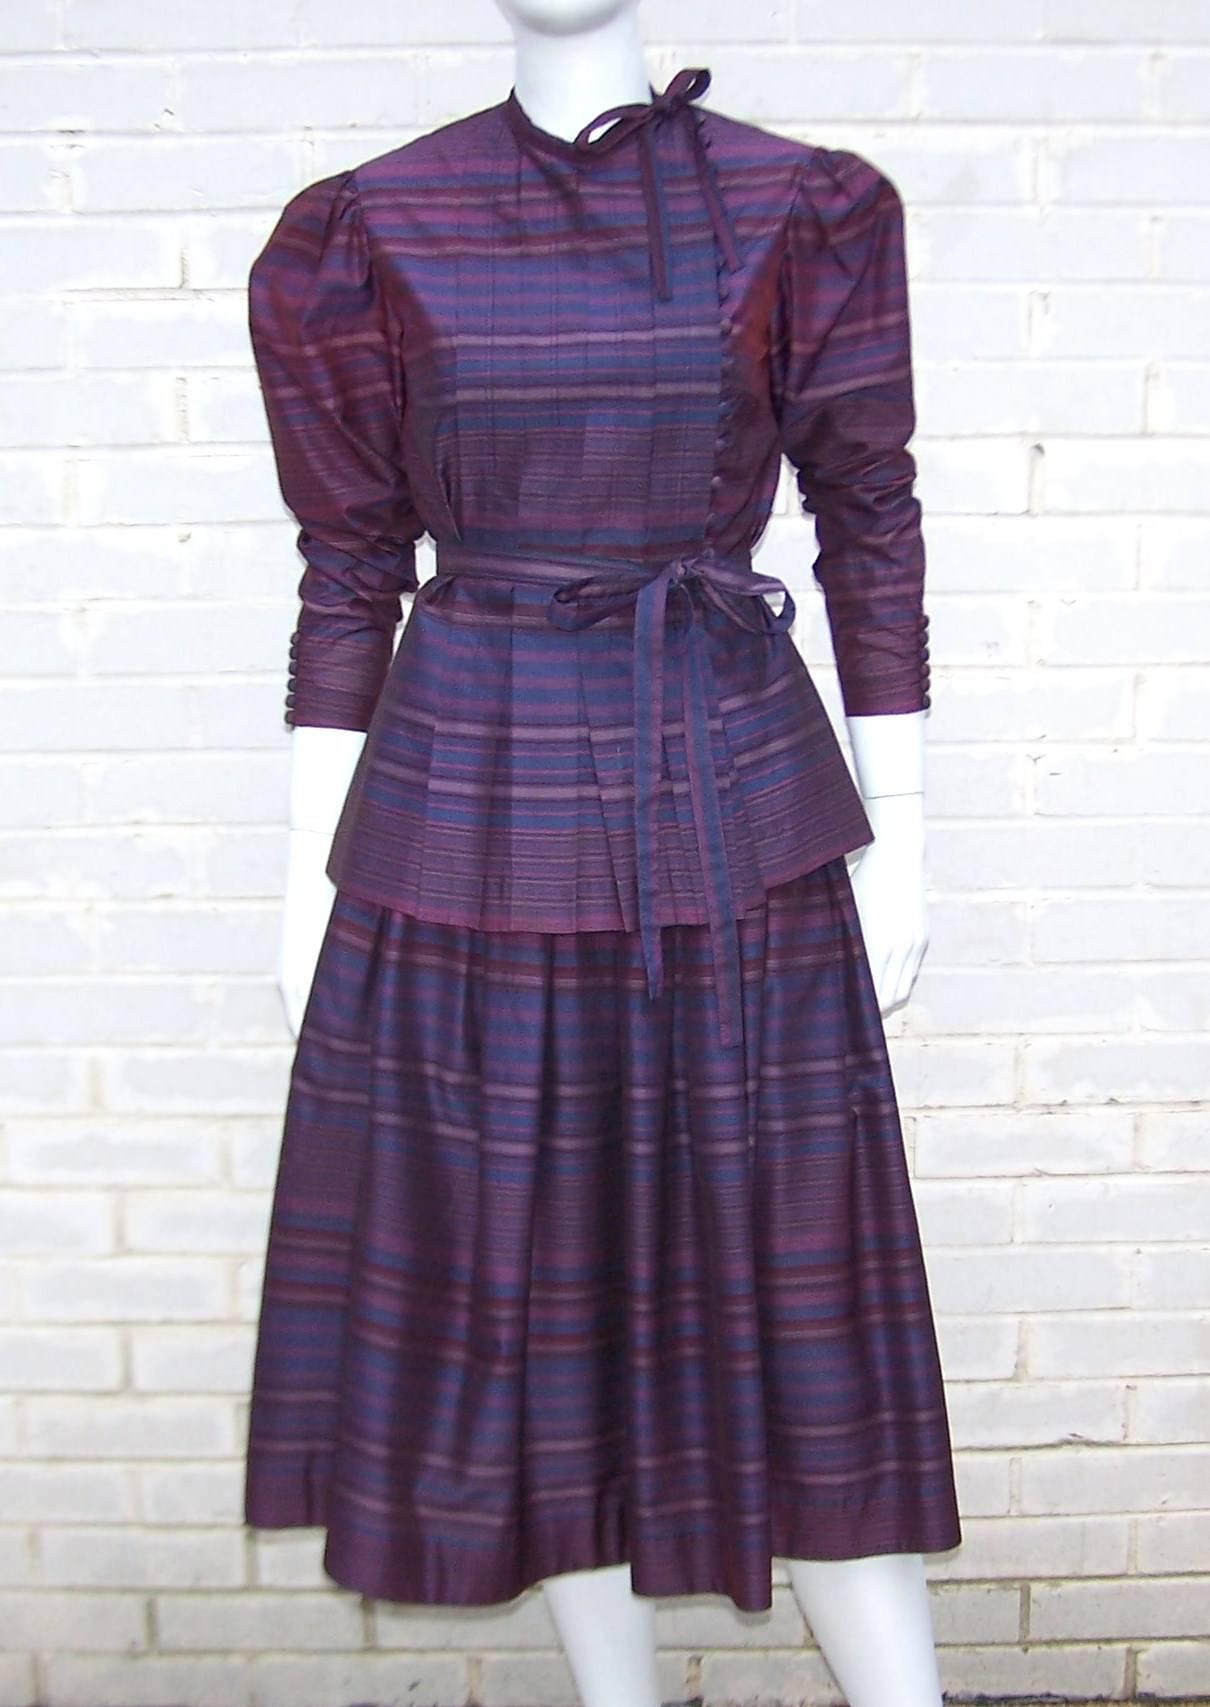 The detail on this 2-piece dress ensemble is up to Pearl and Albert Nipon's standards for providing feminine and stylish attire.  The top has an asymmetrical tie at the neck with a brilliant row of buttons at the front and the cuffs.  Modest